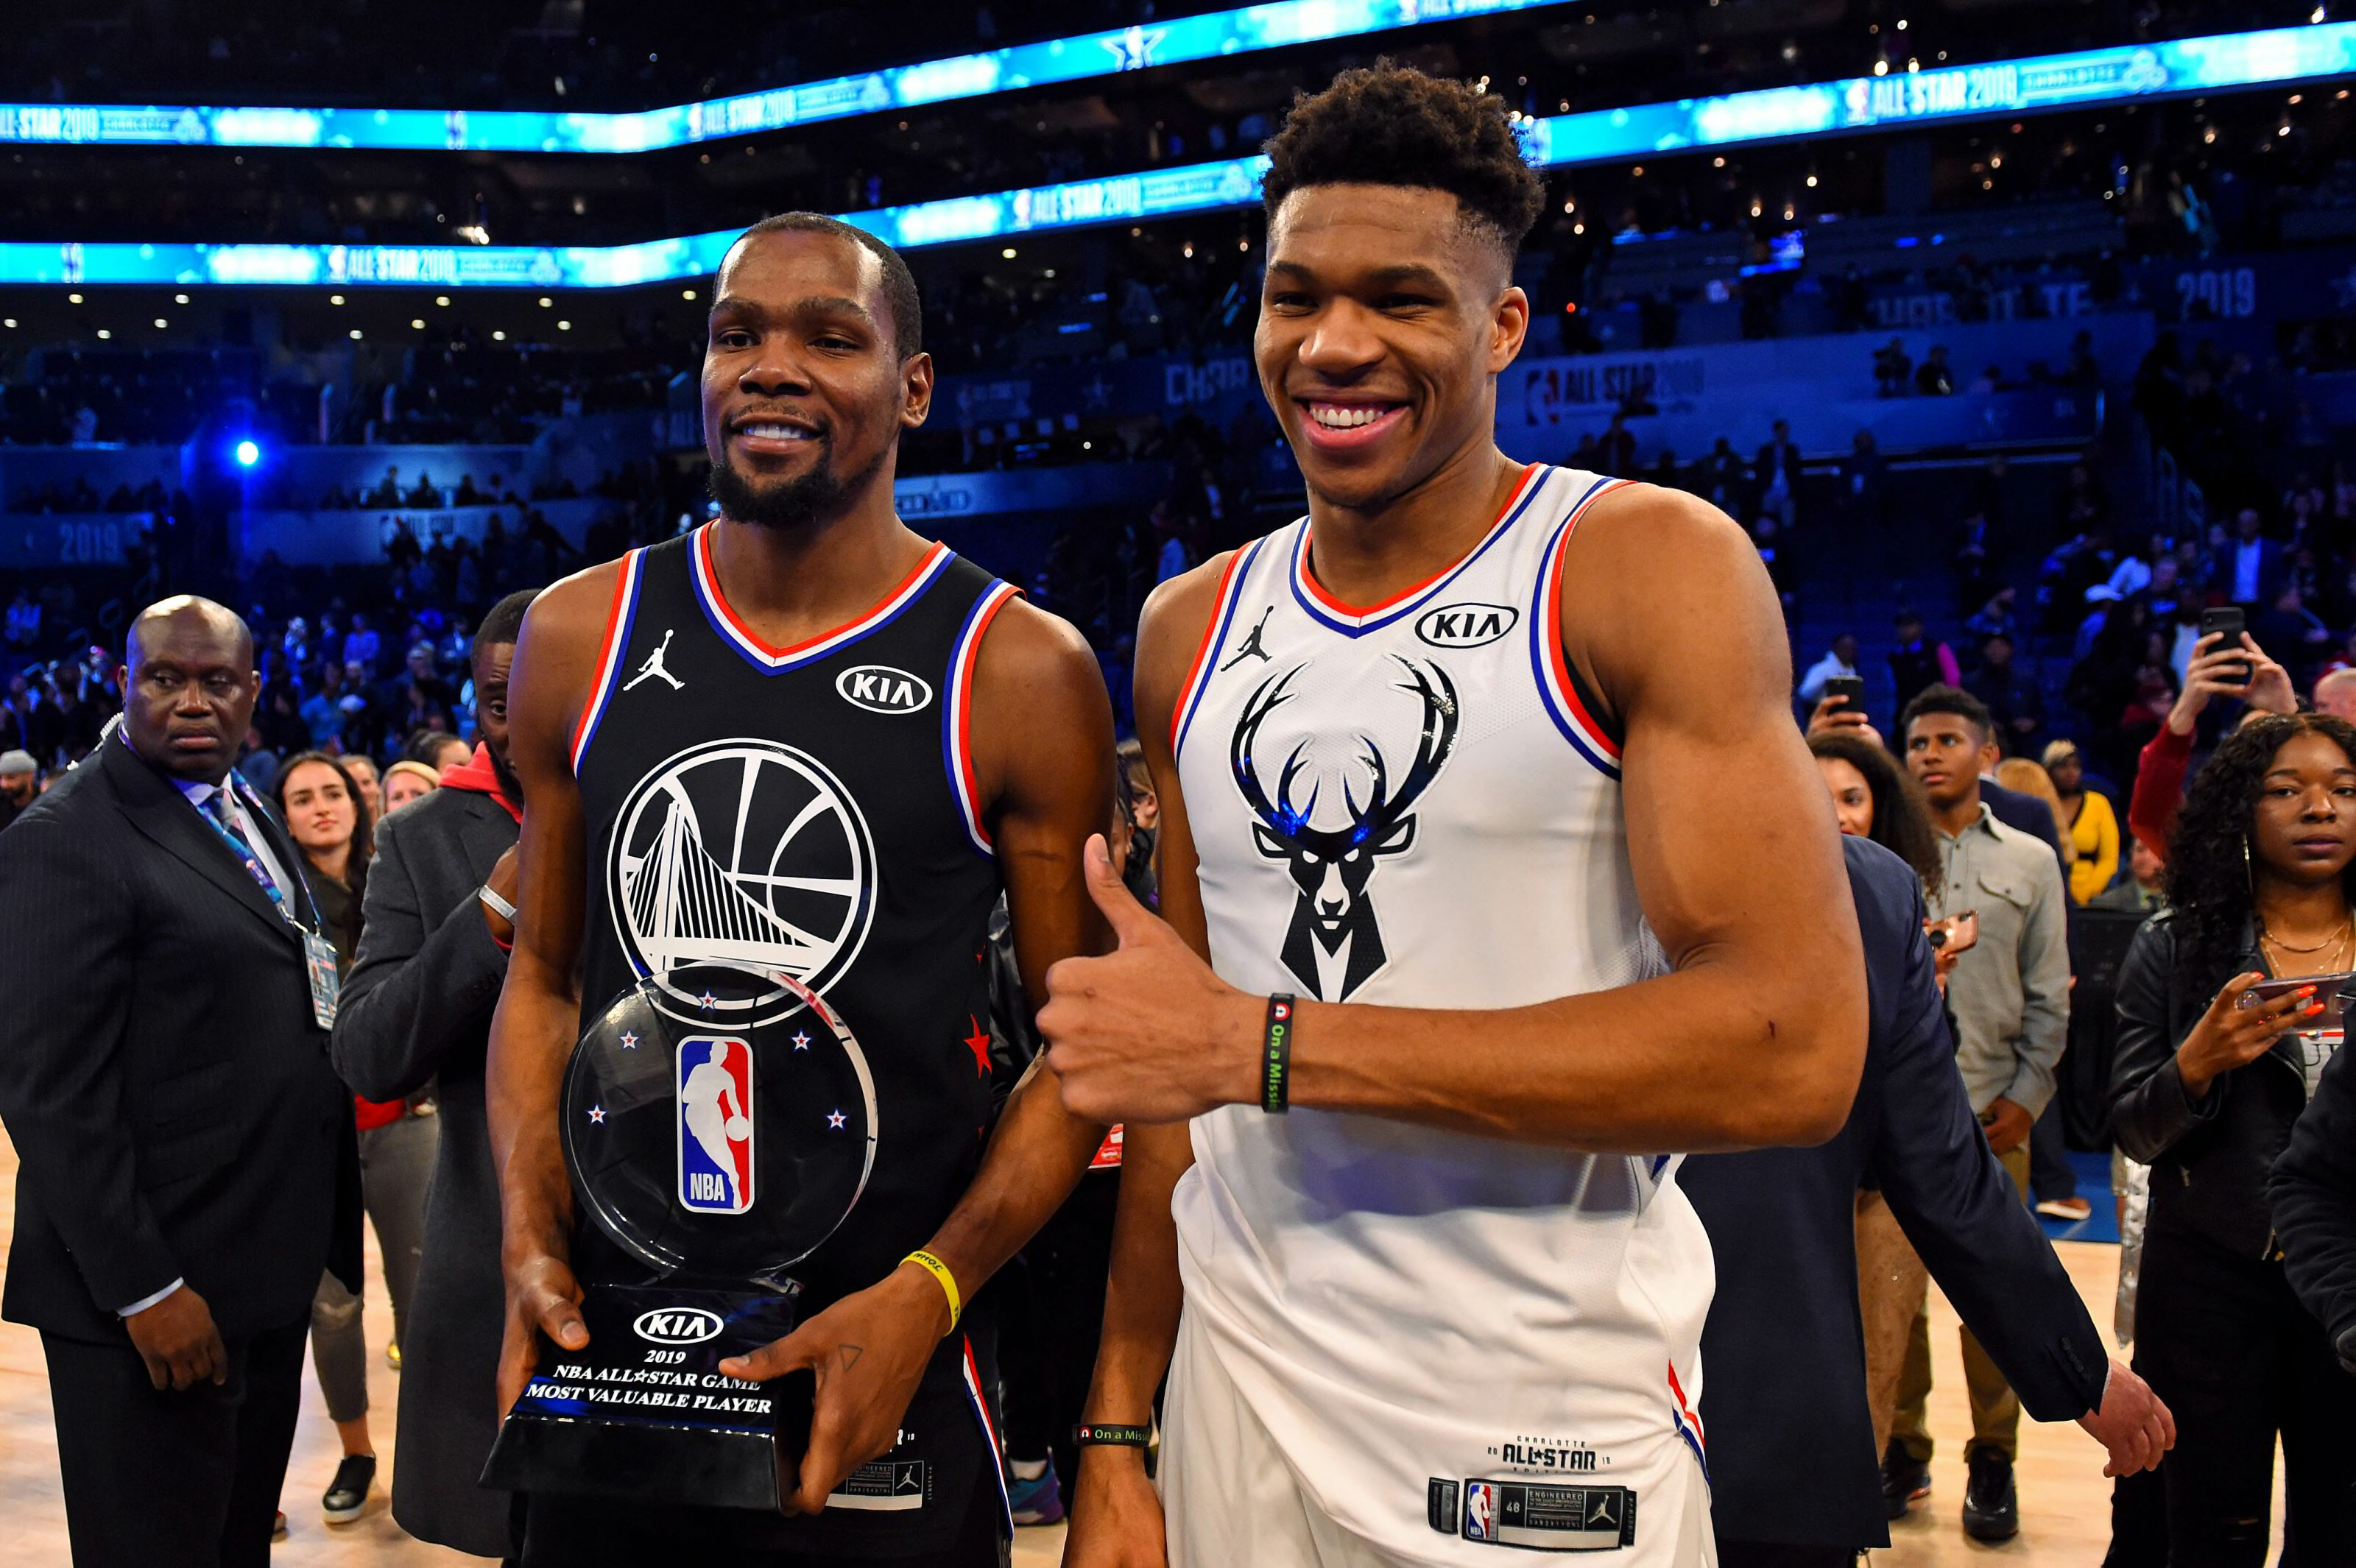 OKC Thunder Durant chose a ring over loyalty; Giannis captured both.